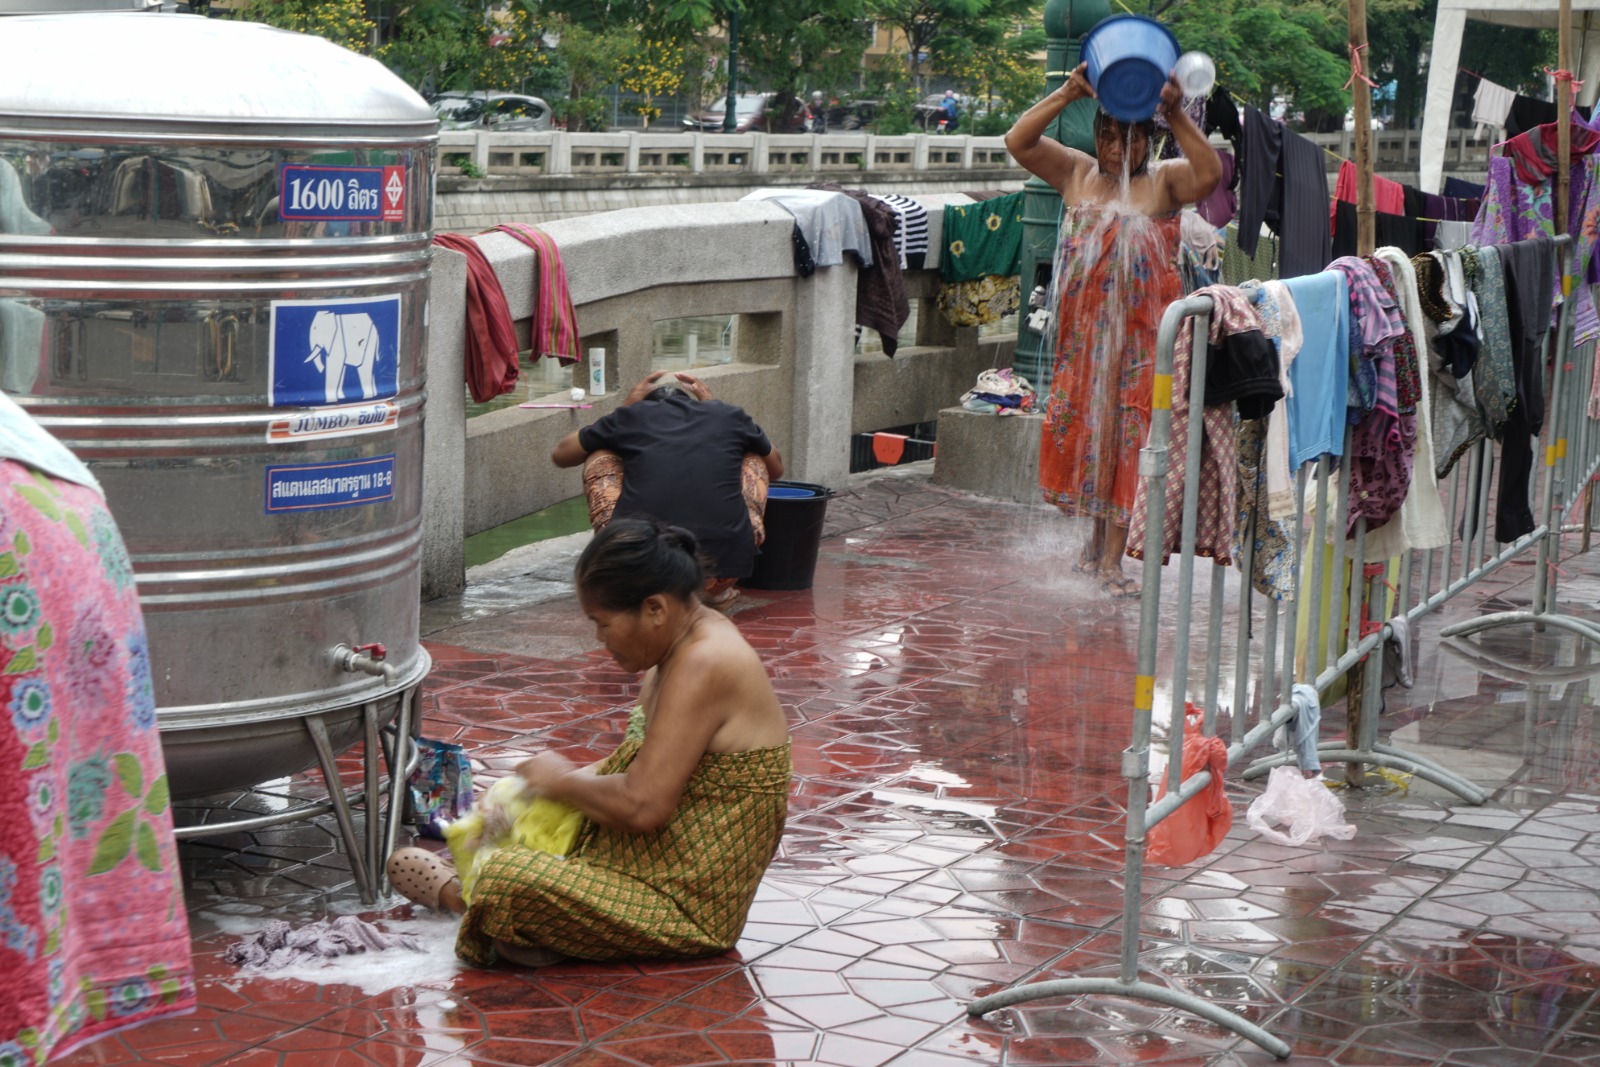 Citizens bathe and do laundry with fresh water tanks prepared for them. Photo: Coconuts